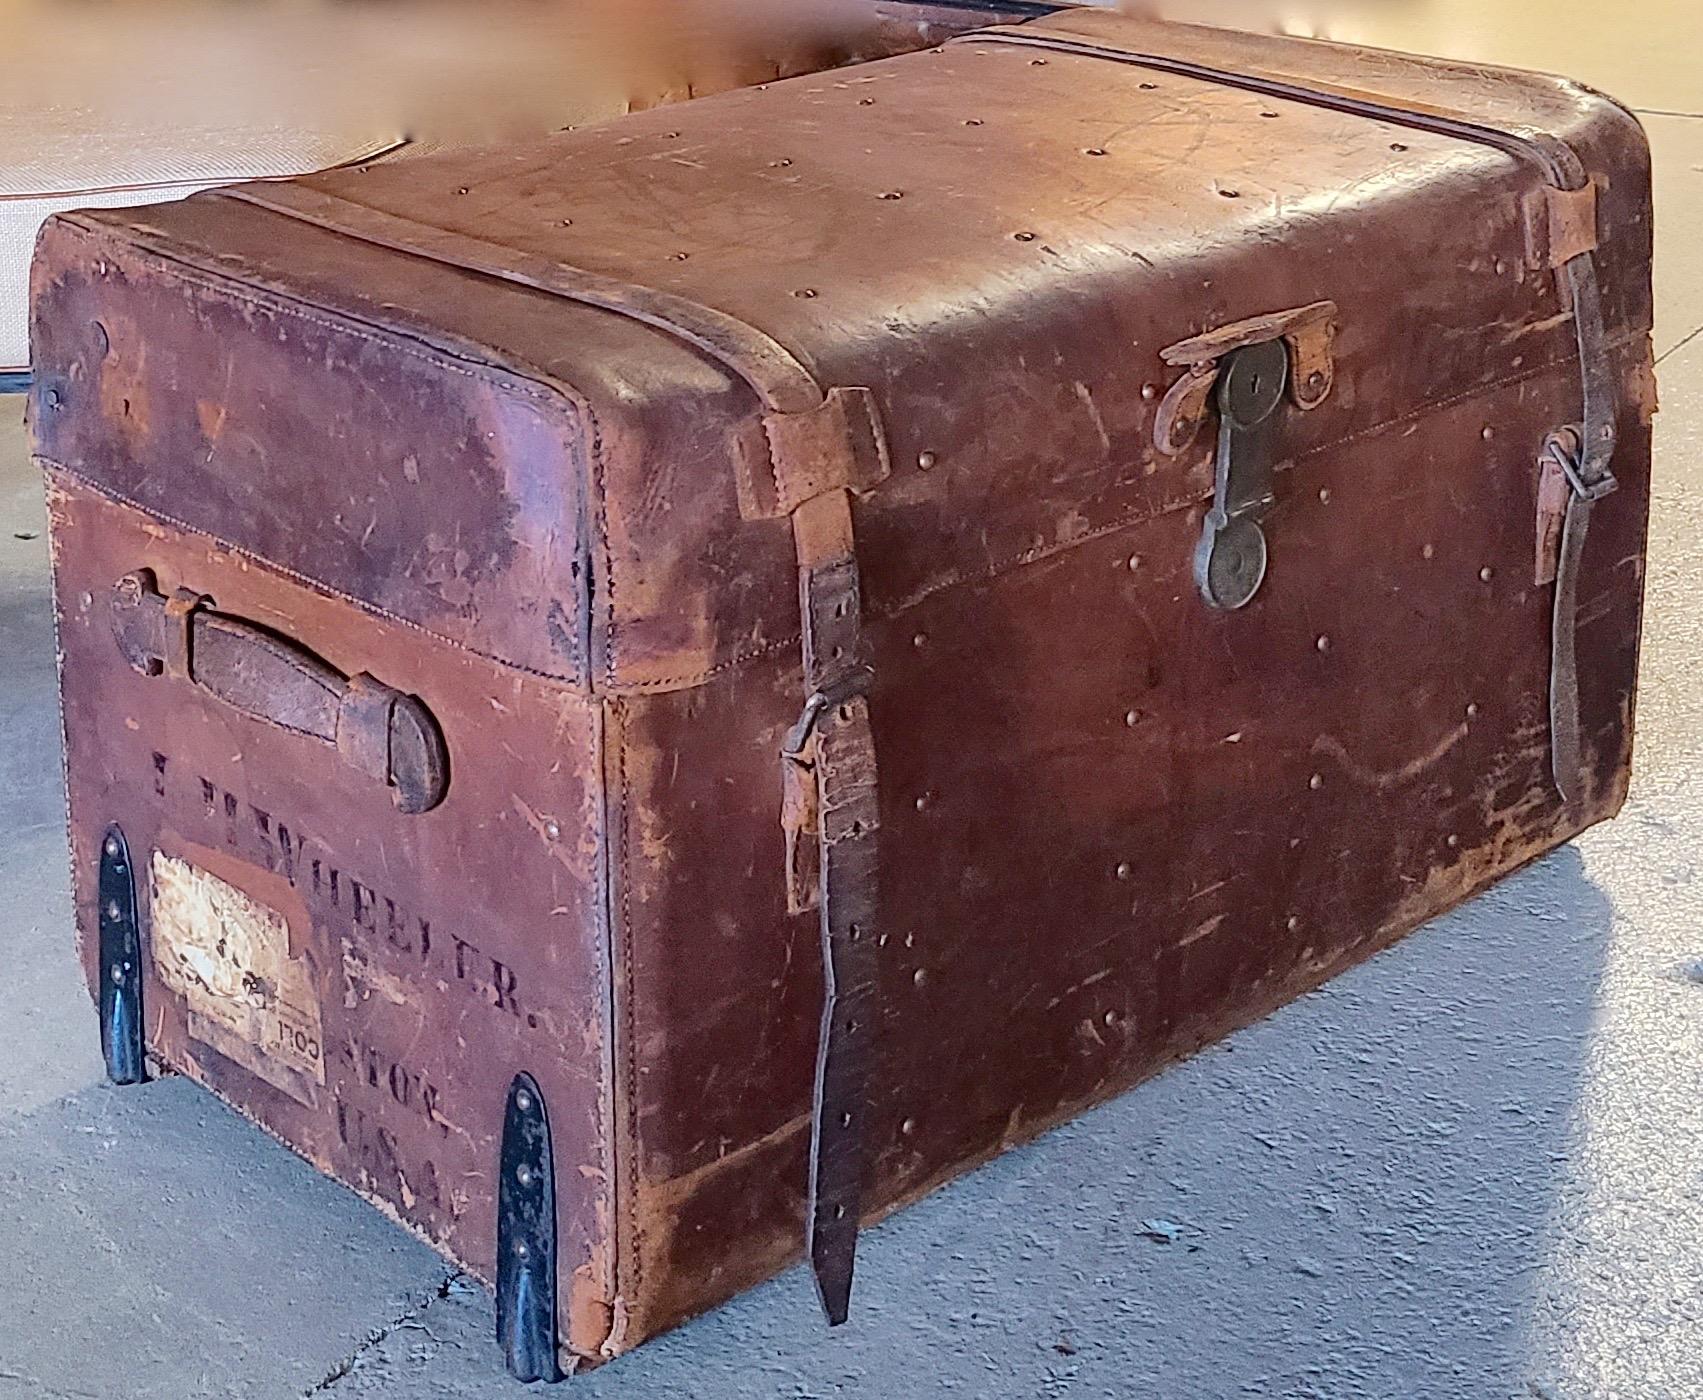 Please message us for a cost effective shipping quote to your location.

Leather Travel Trunk. Brass Lock marked 1864. Brass Rivets on top. Iron wheels at
corner. Wood Slats at bottom. Linen Lined. Says: L. H. Wheeler Boston USA on side.
  
From